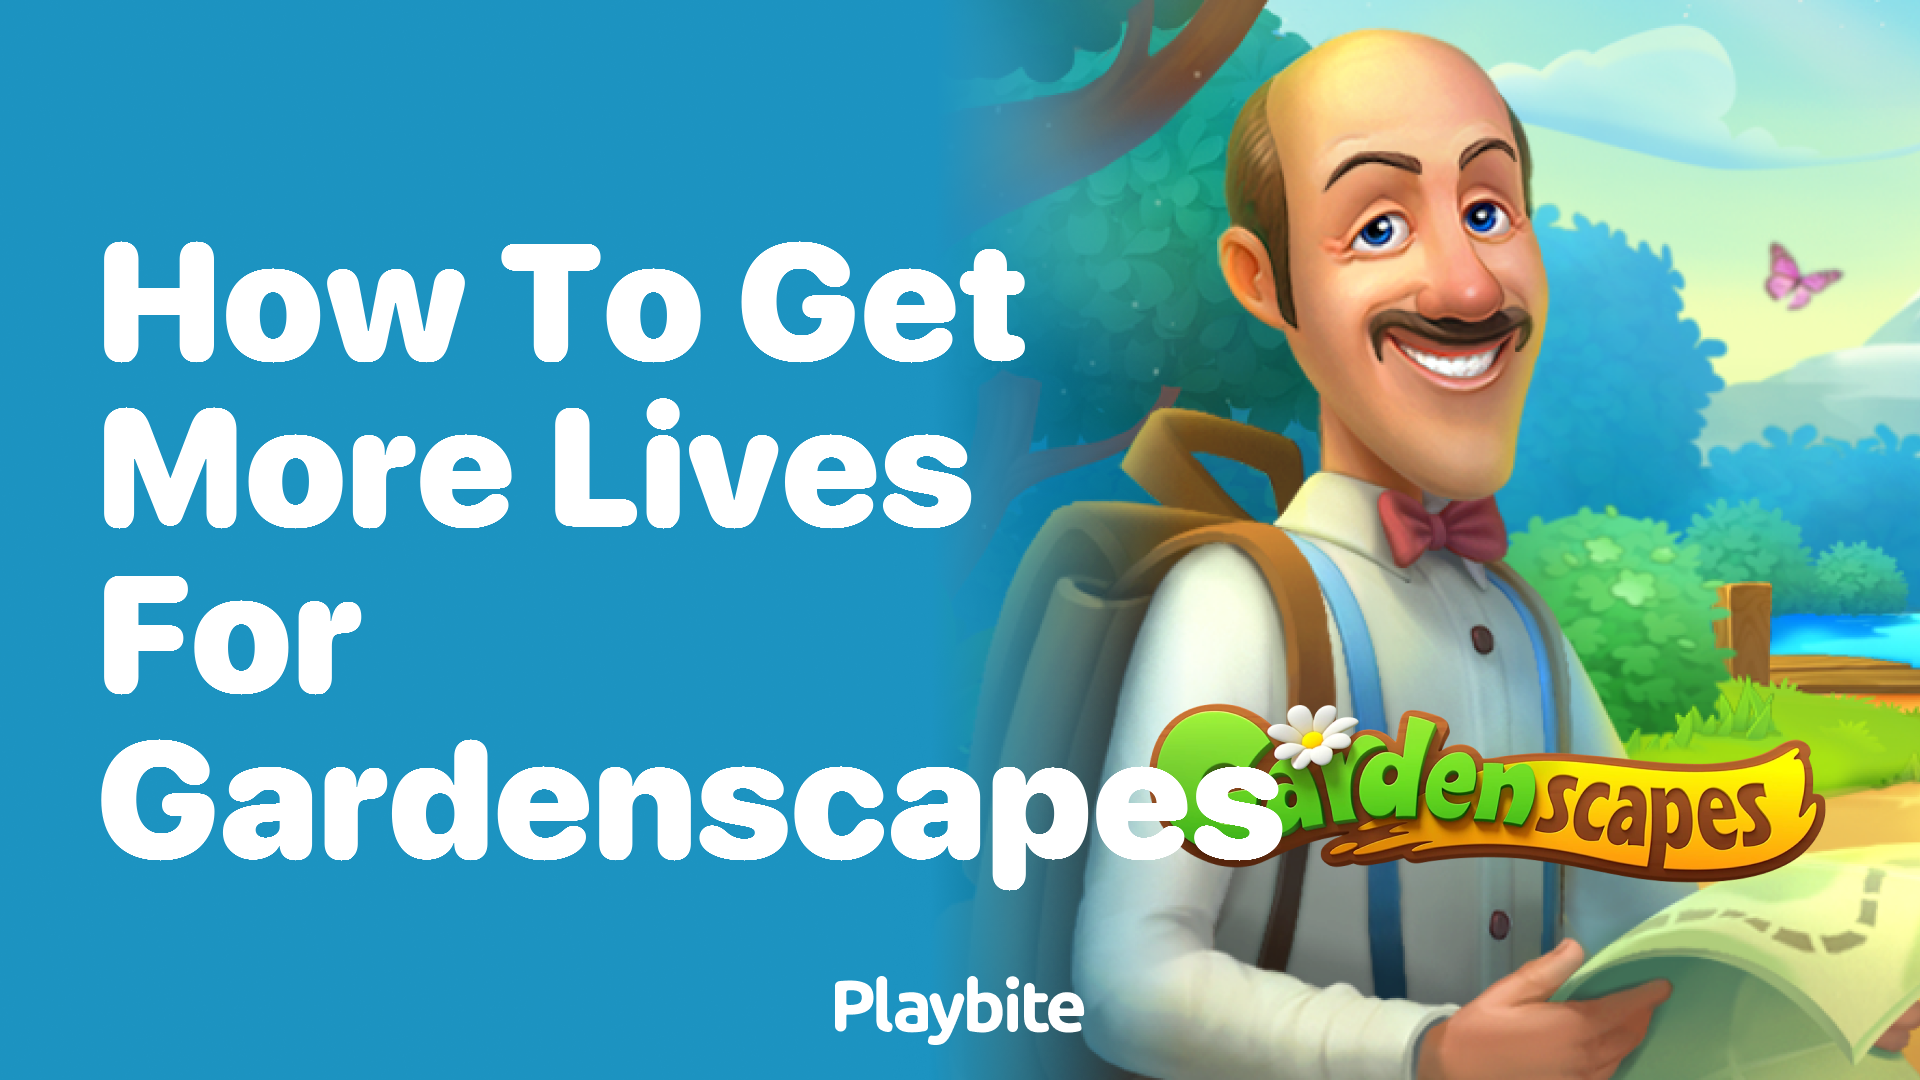 How to Get More Lives for Gardenscapes